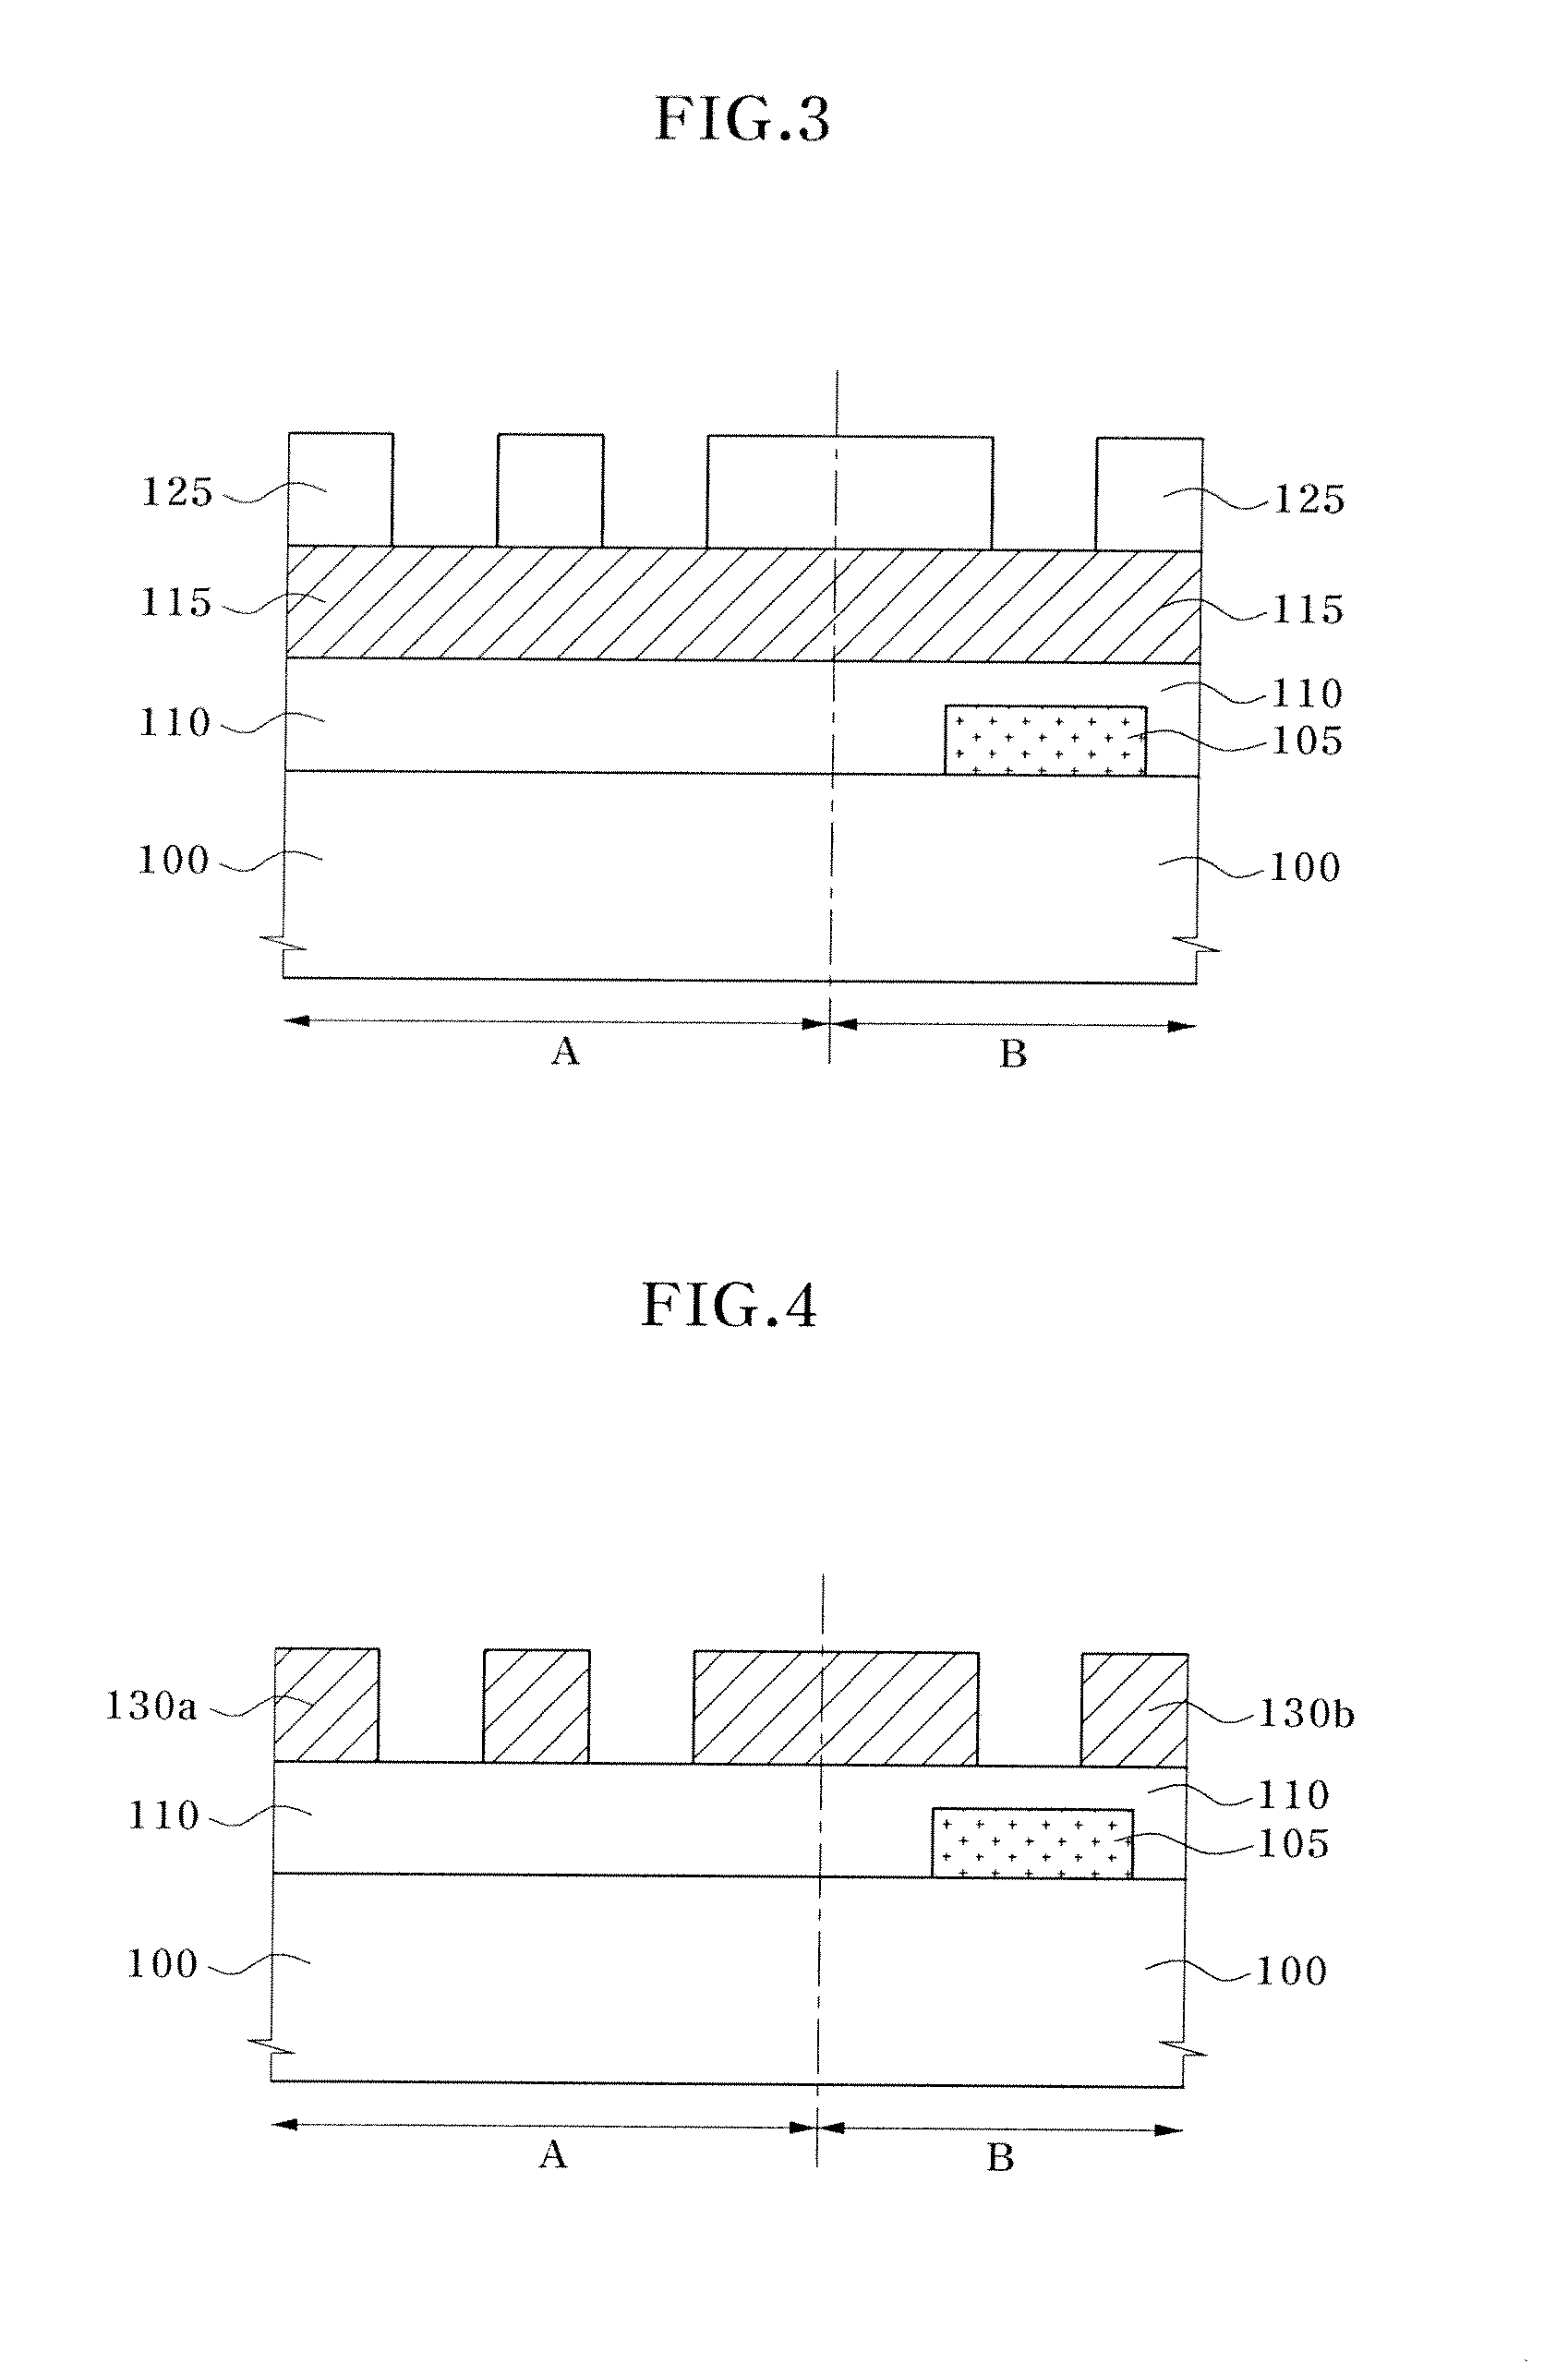 Method for Manufacturing Photo Mask Using Fluorescence Layer